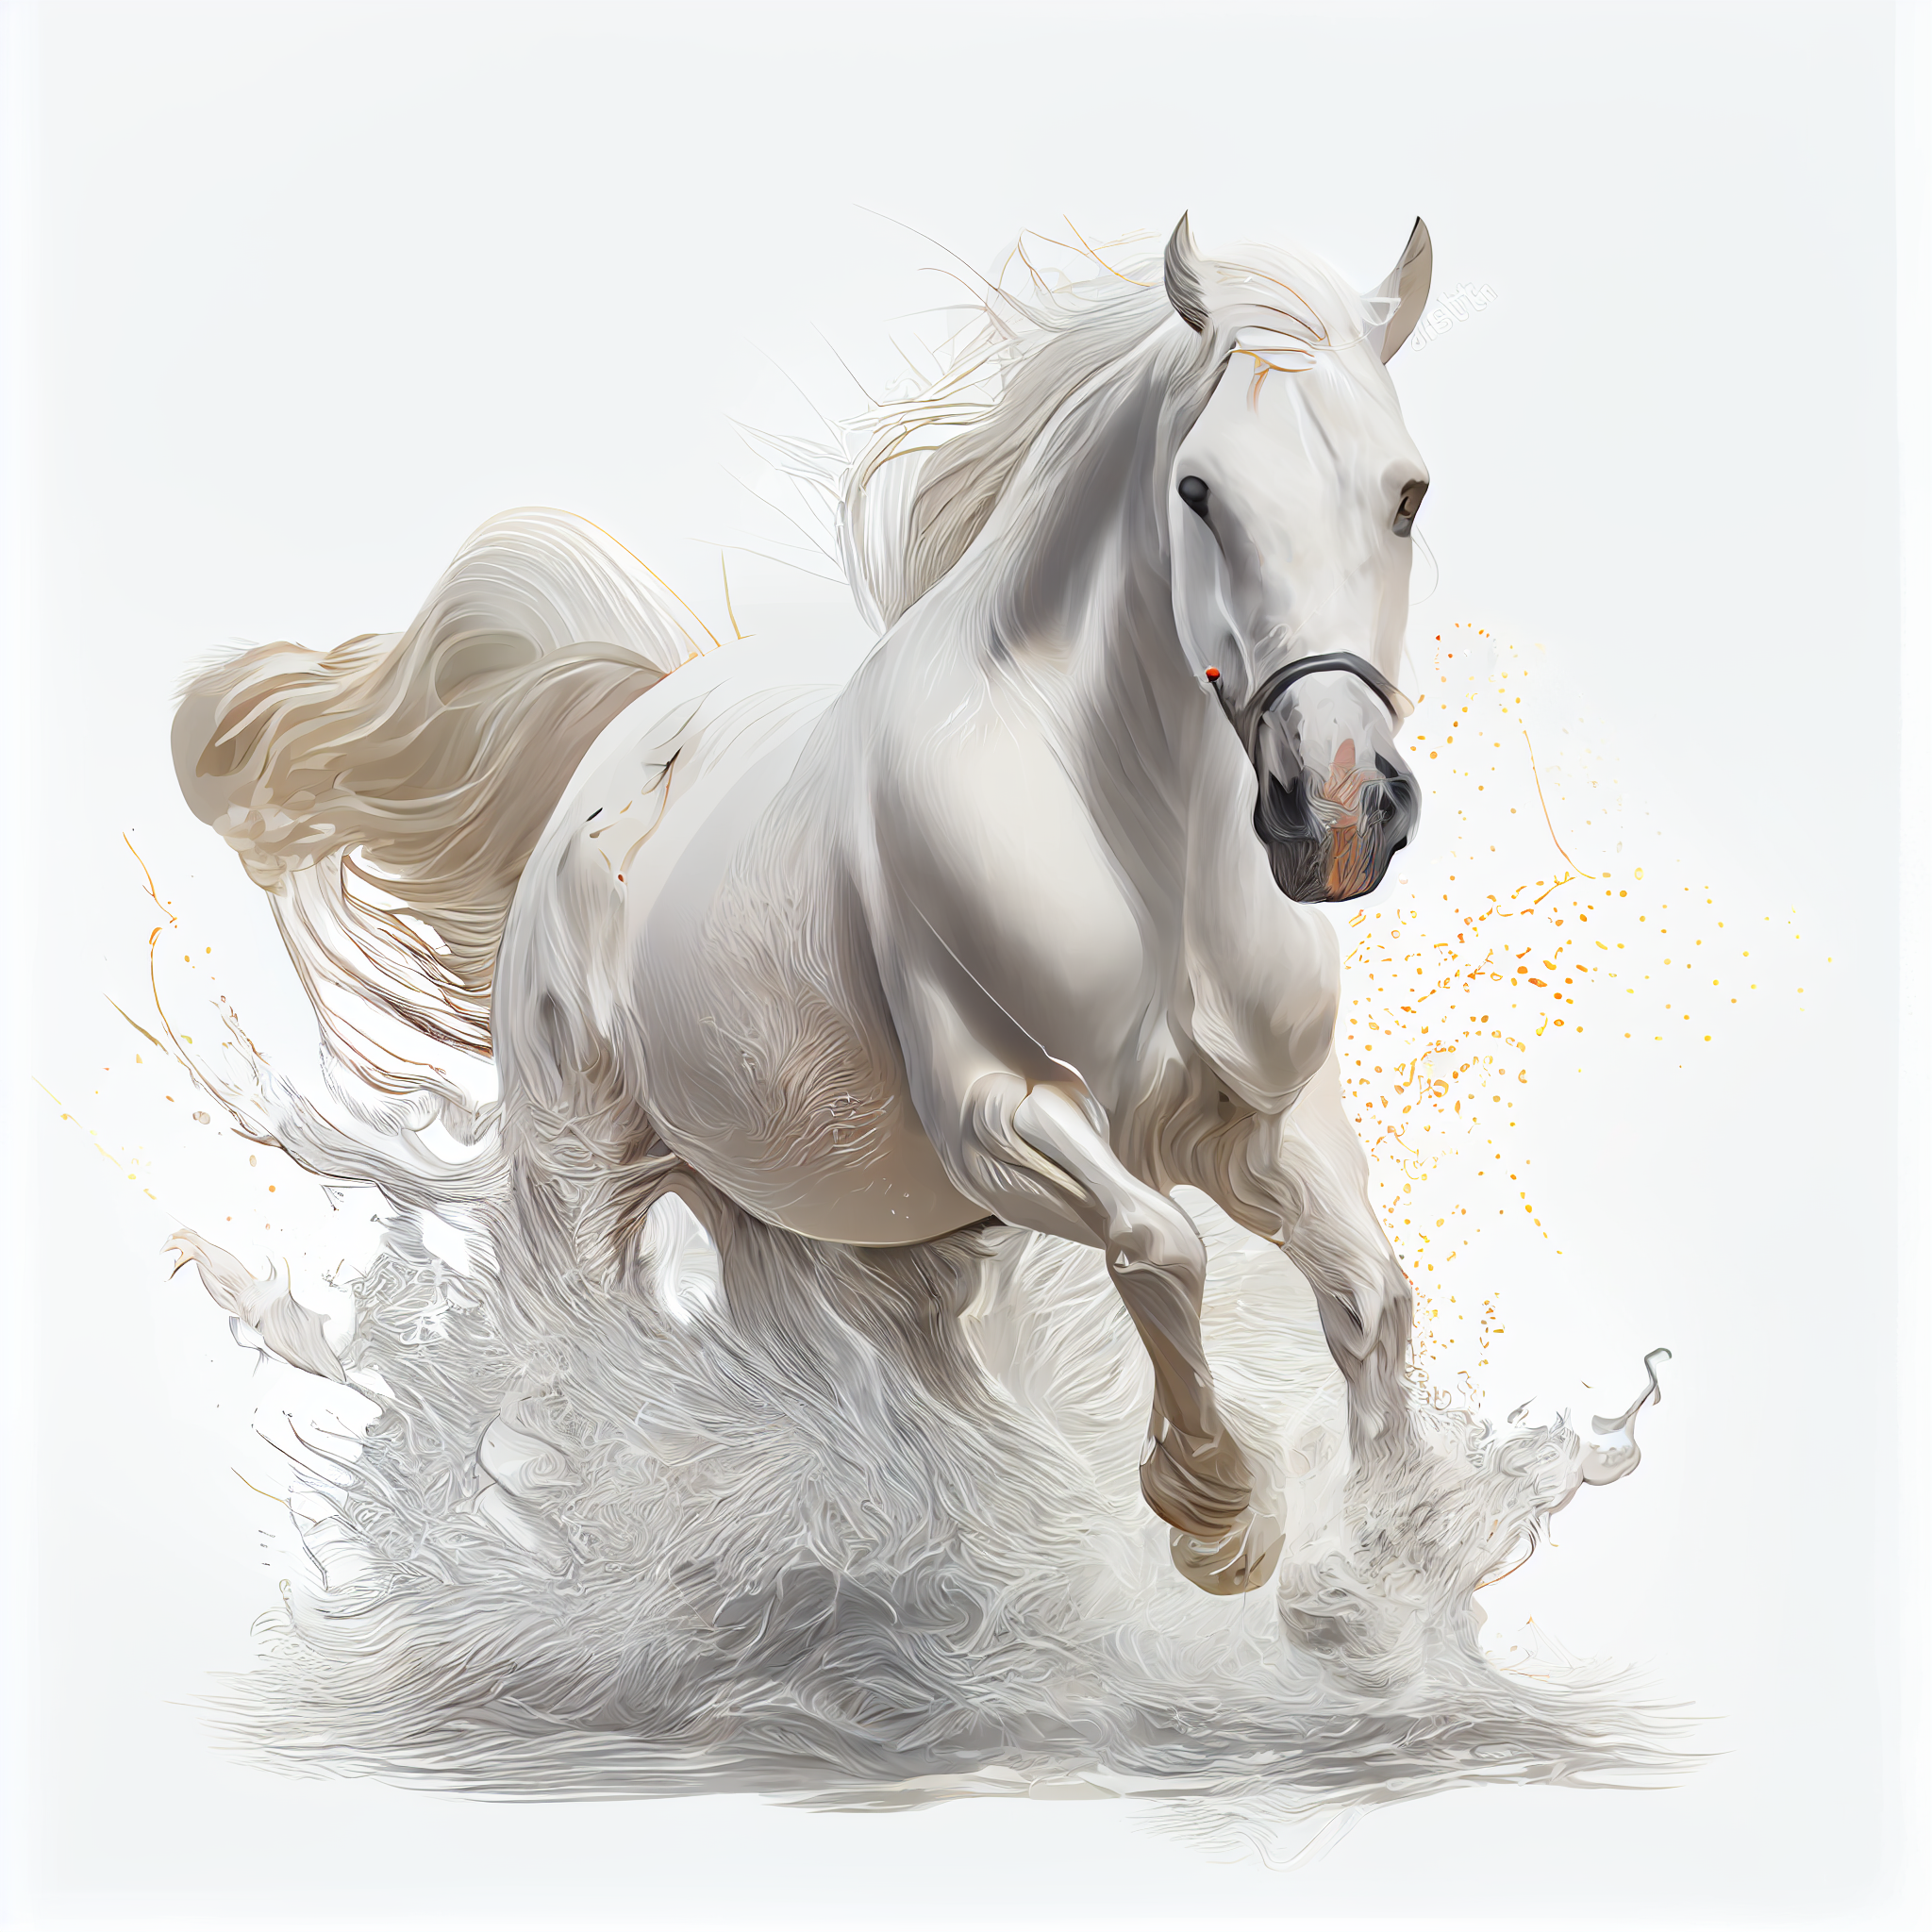 Horse　Power　Majestic　Spray　of　and　Grace:　A　White　Stunning　Art　Print　a